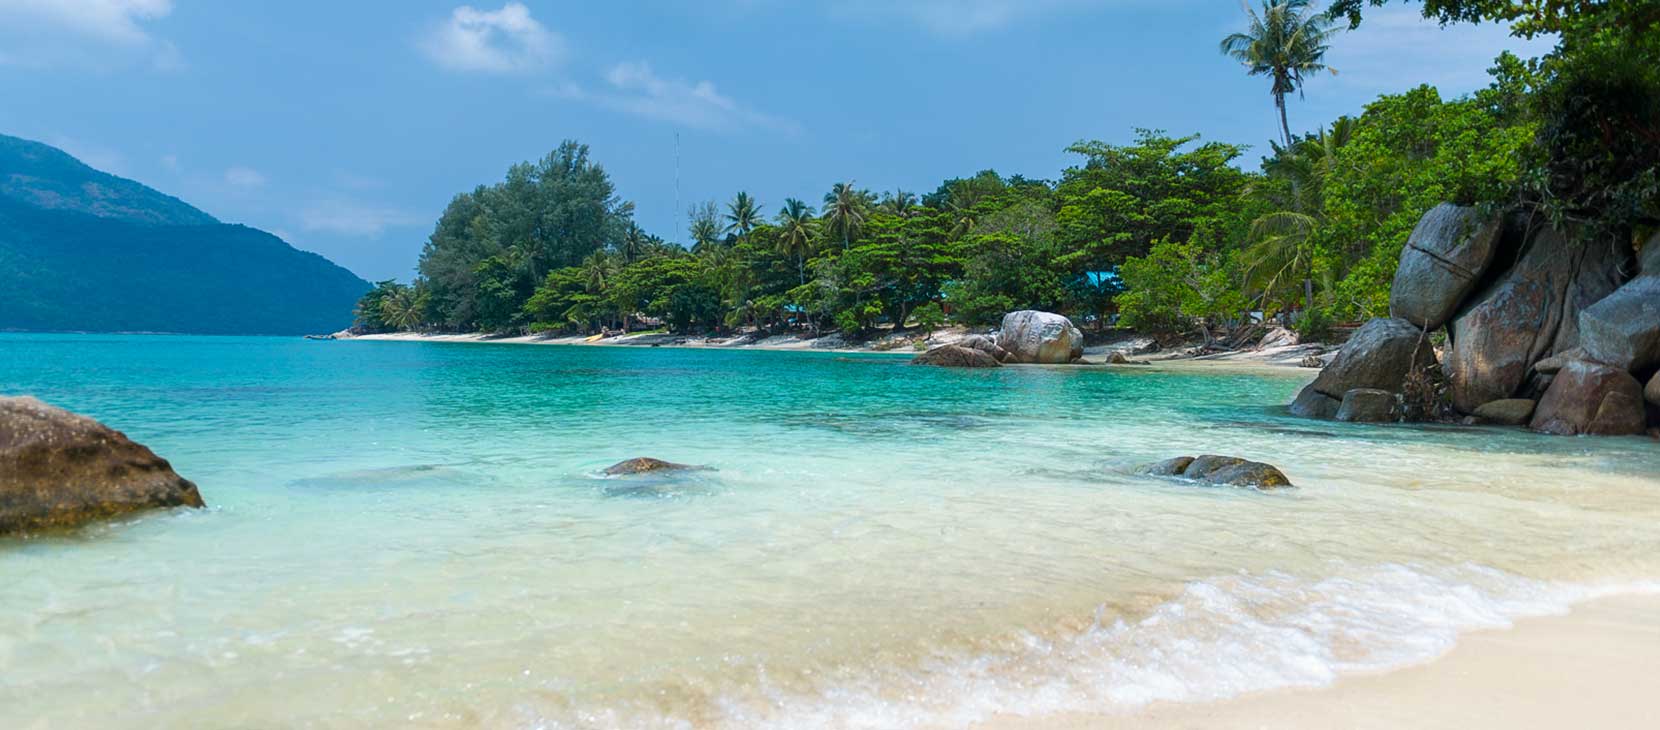 Beaches in Asia for Couples